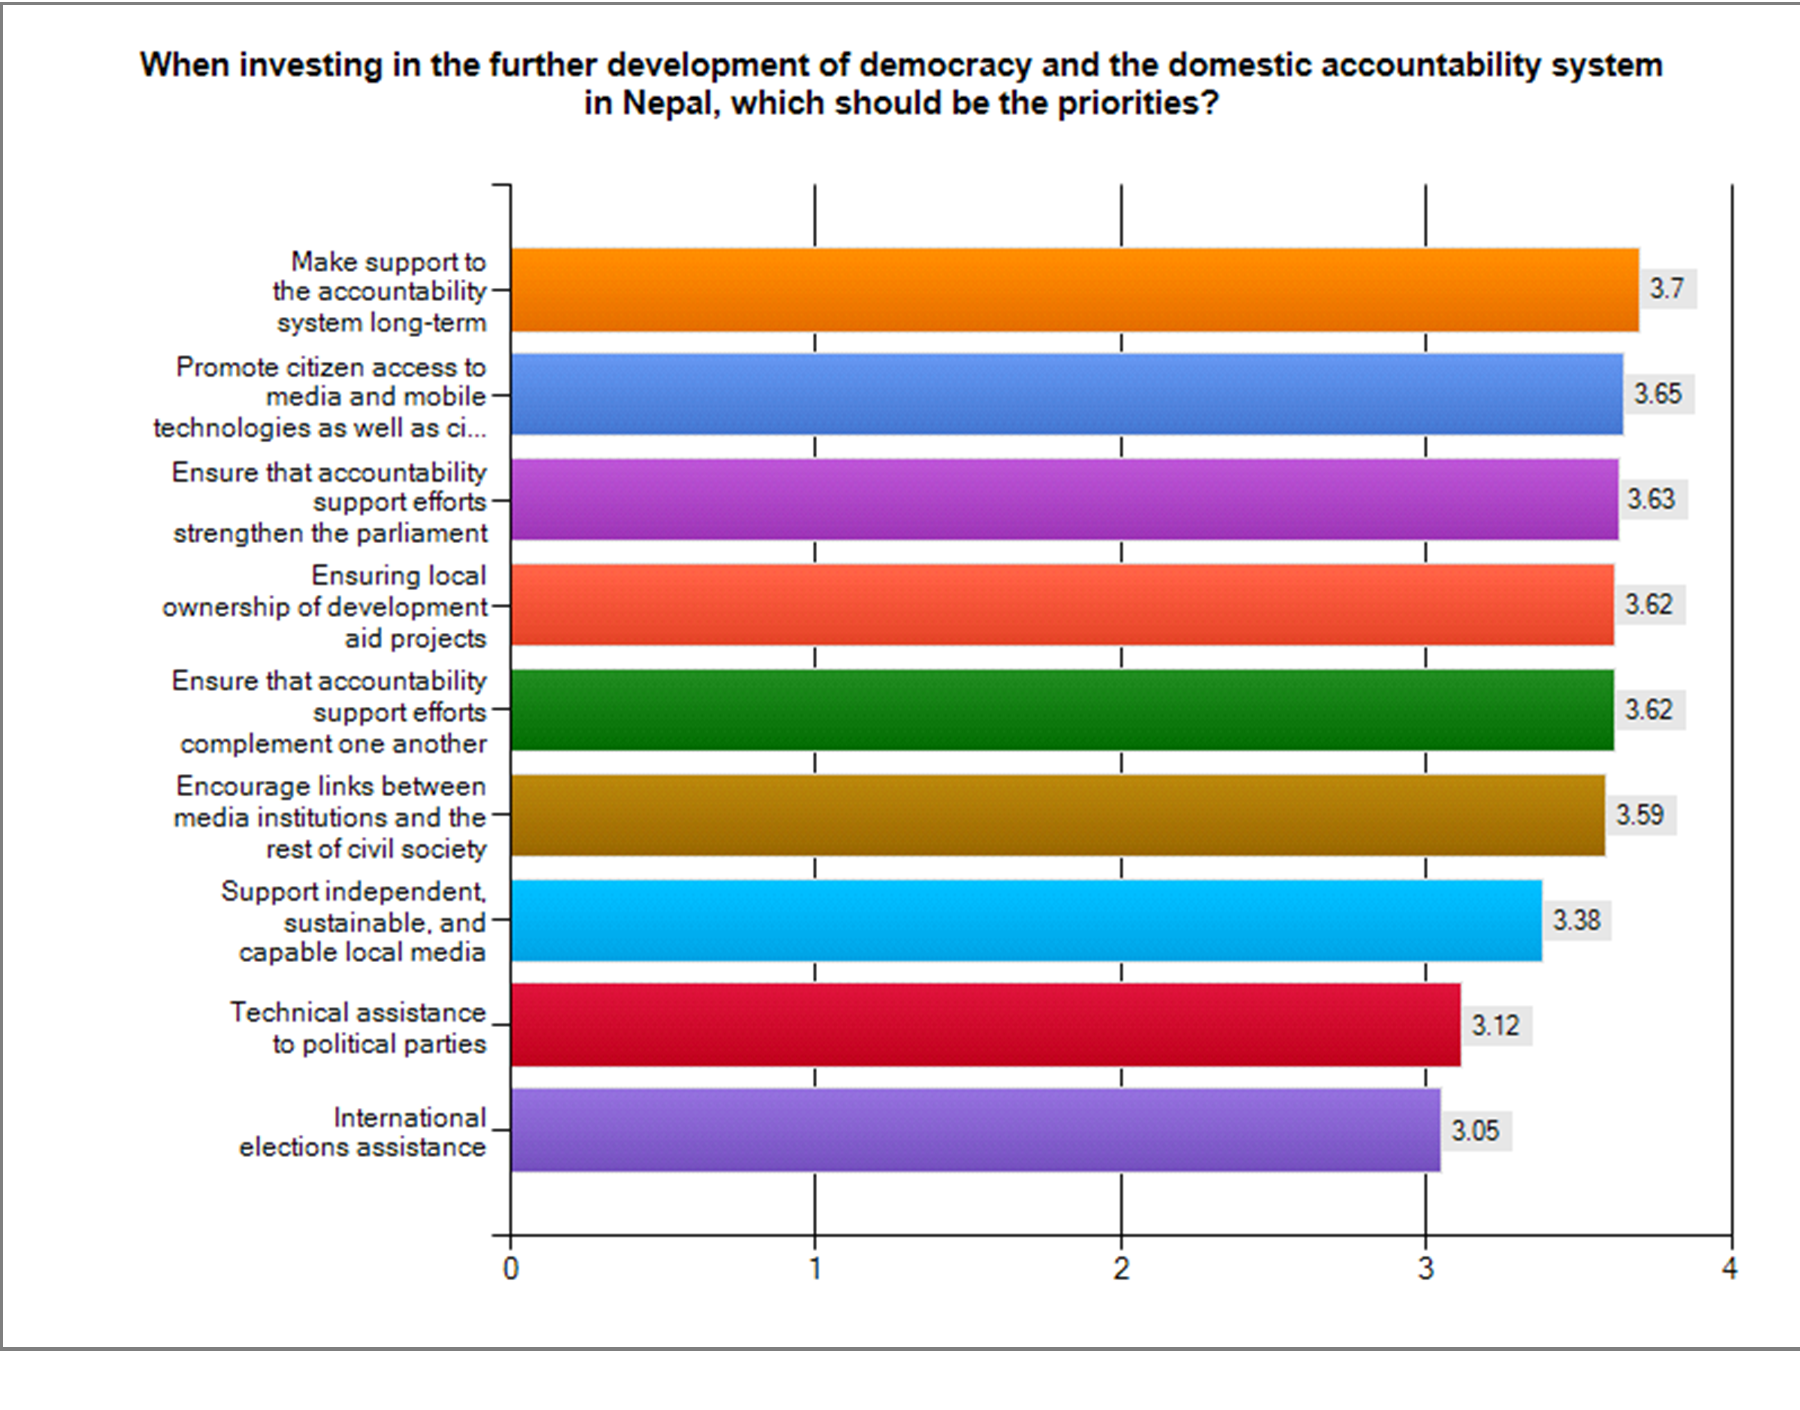 Figure 7: Priorities for the development of the accountability system (average values)